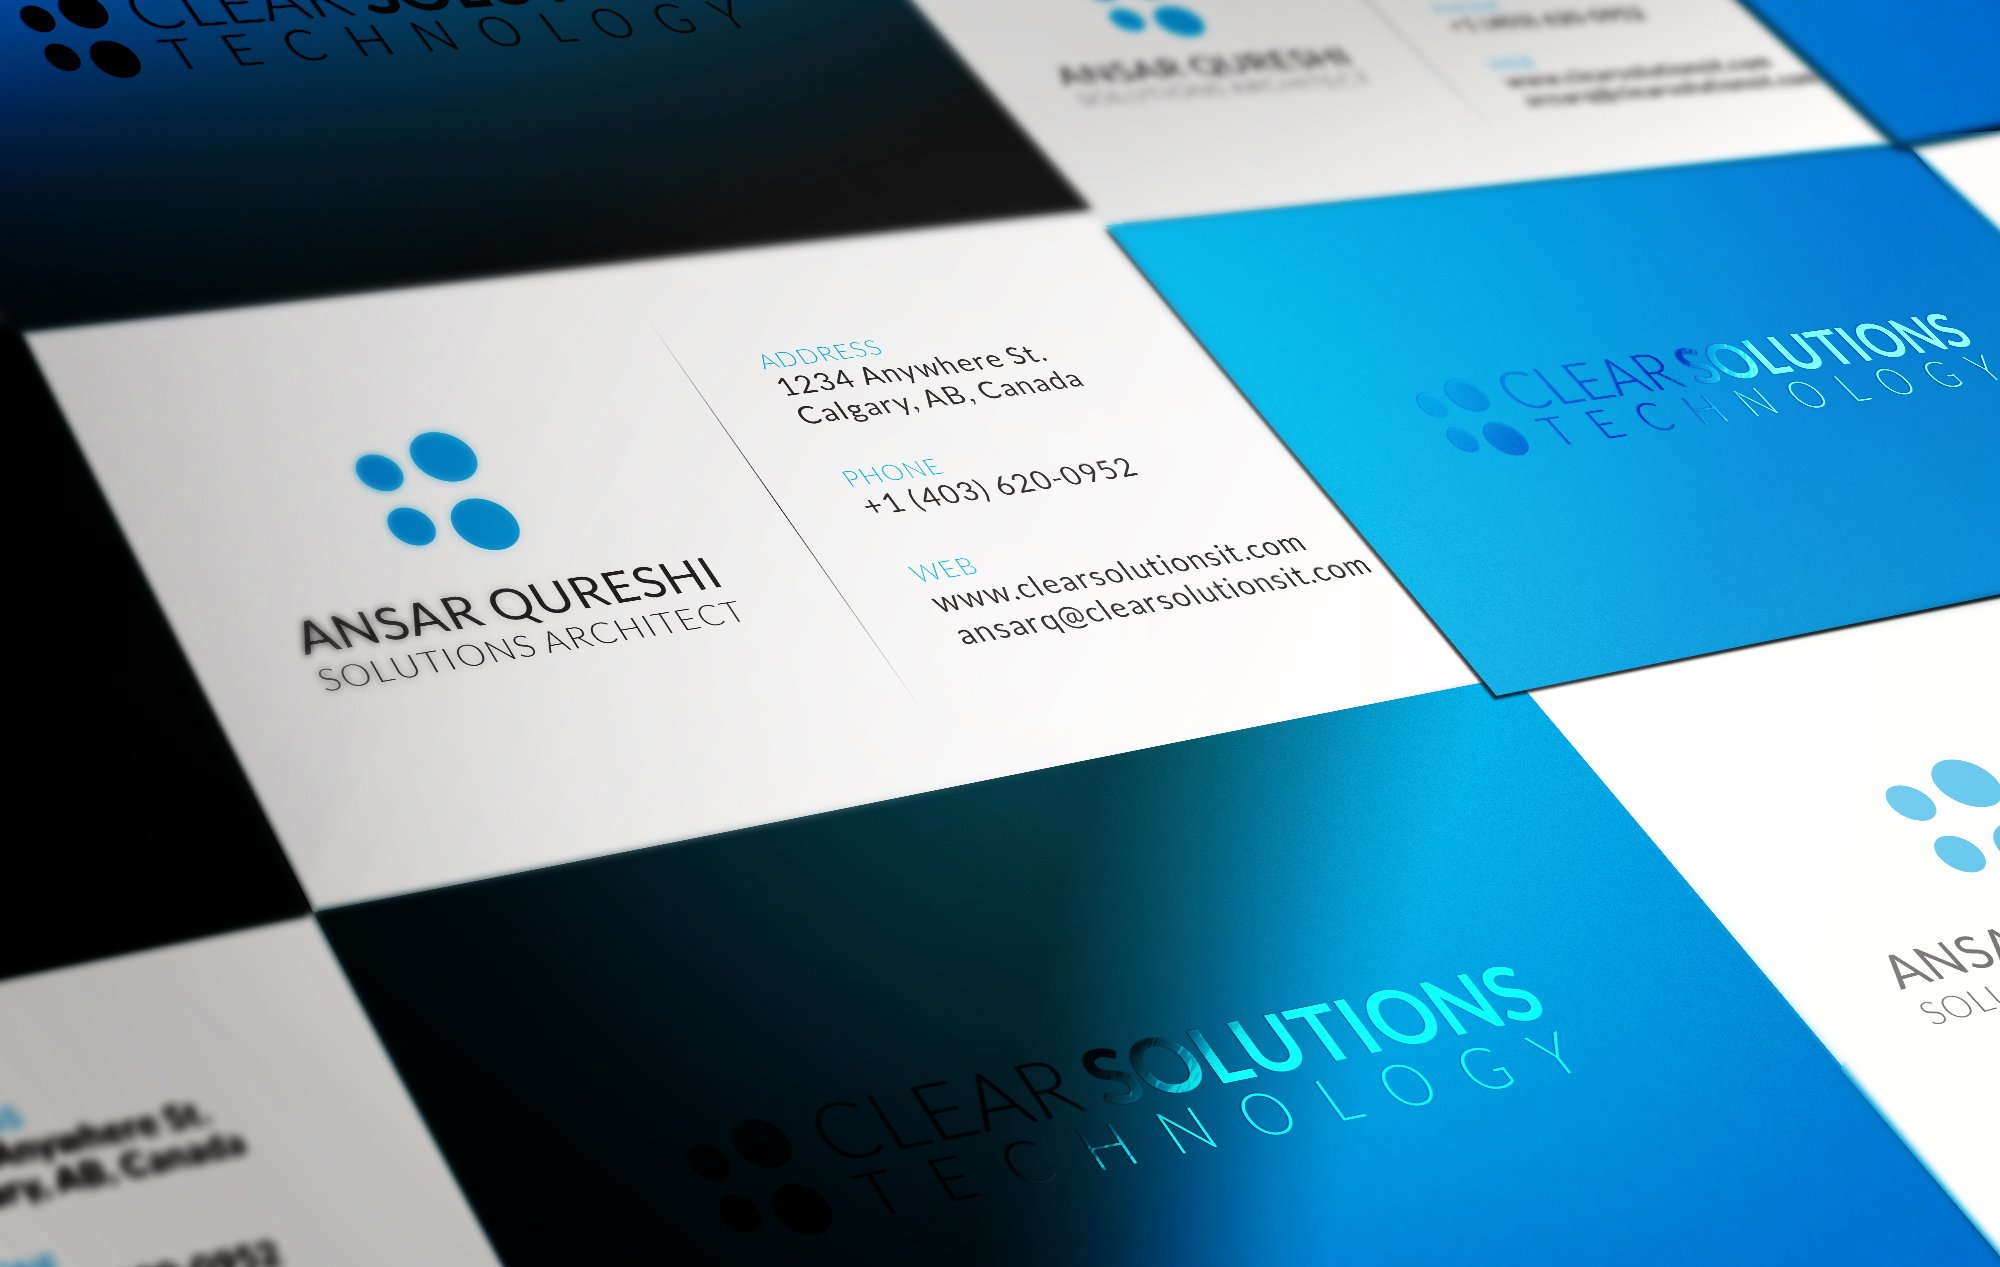 Brand Development for Clear Solutions Technology